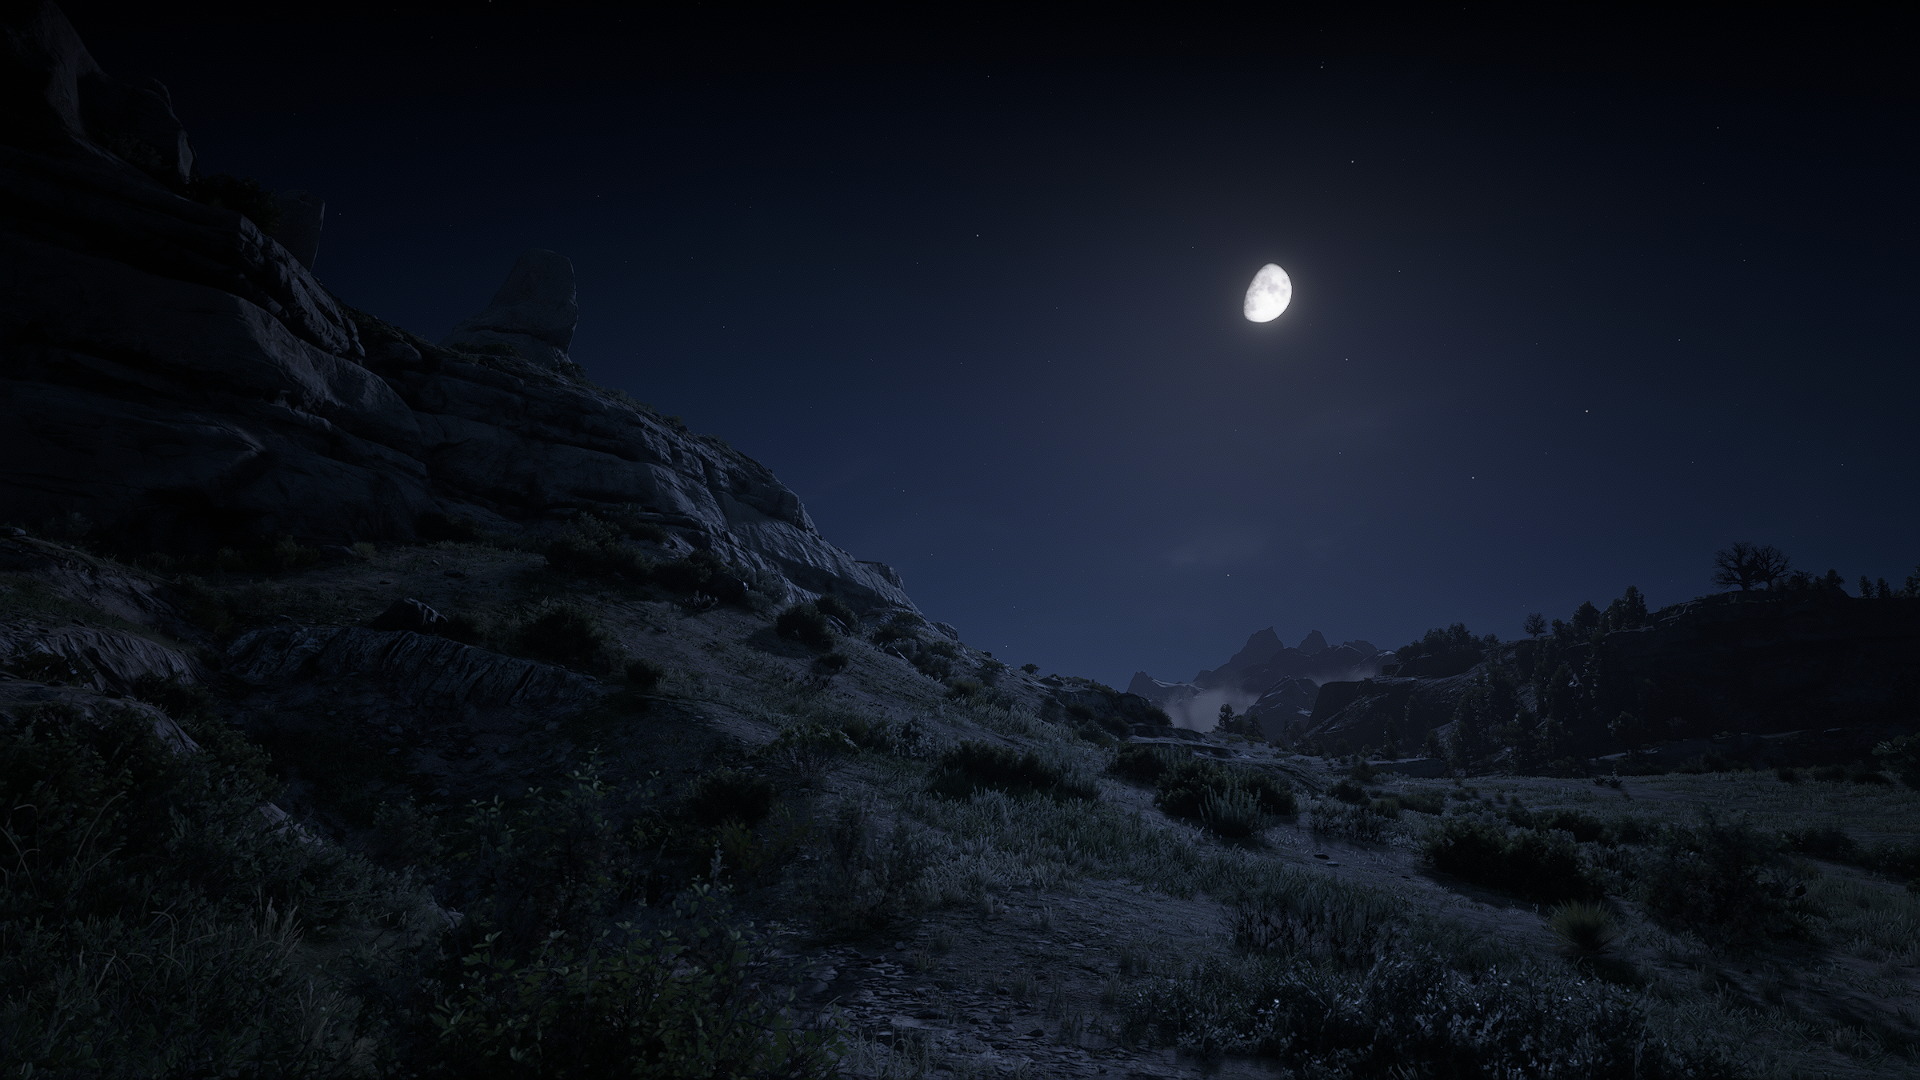 Red Dead Redemption 2 Night Moonlight Nature Landscape Screen Shot Foliage 1920x1080